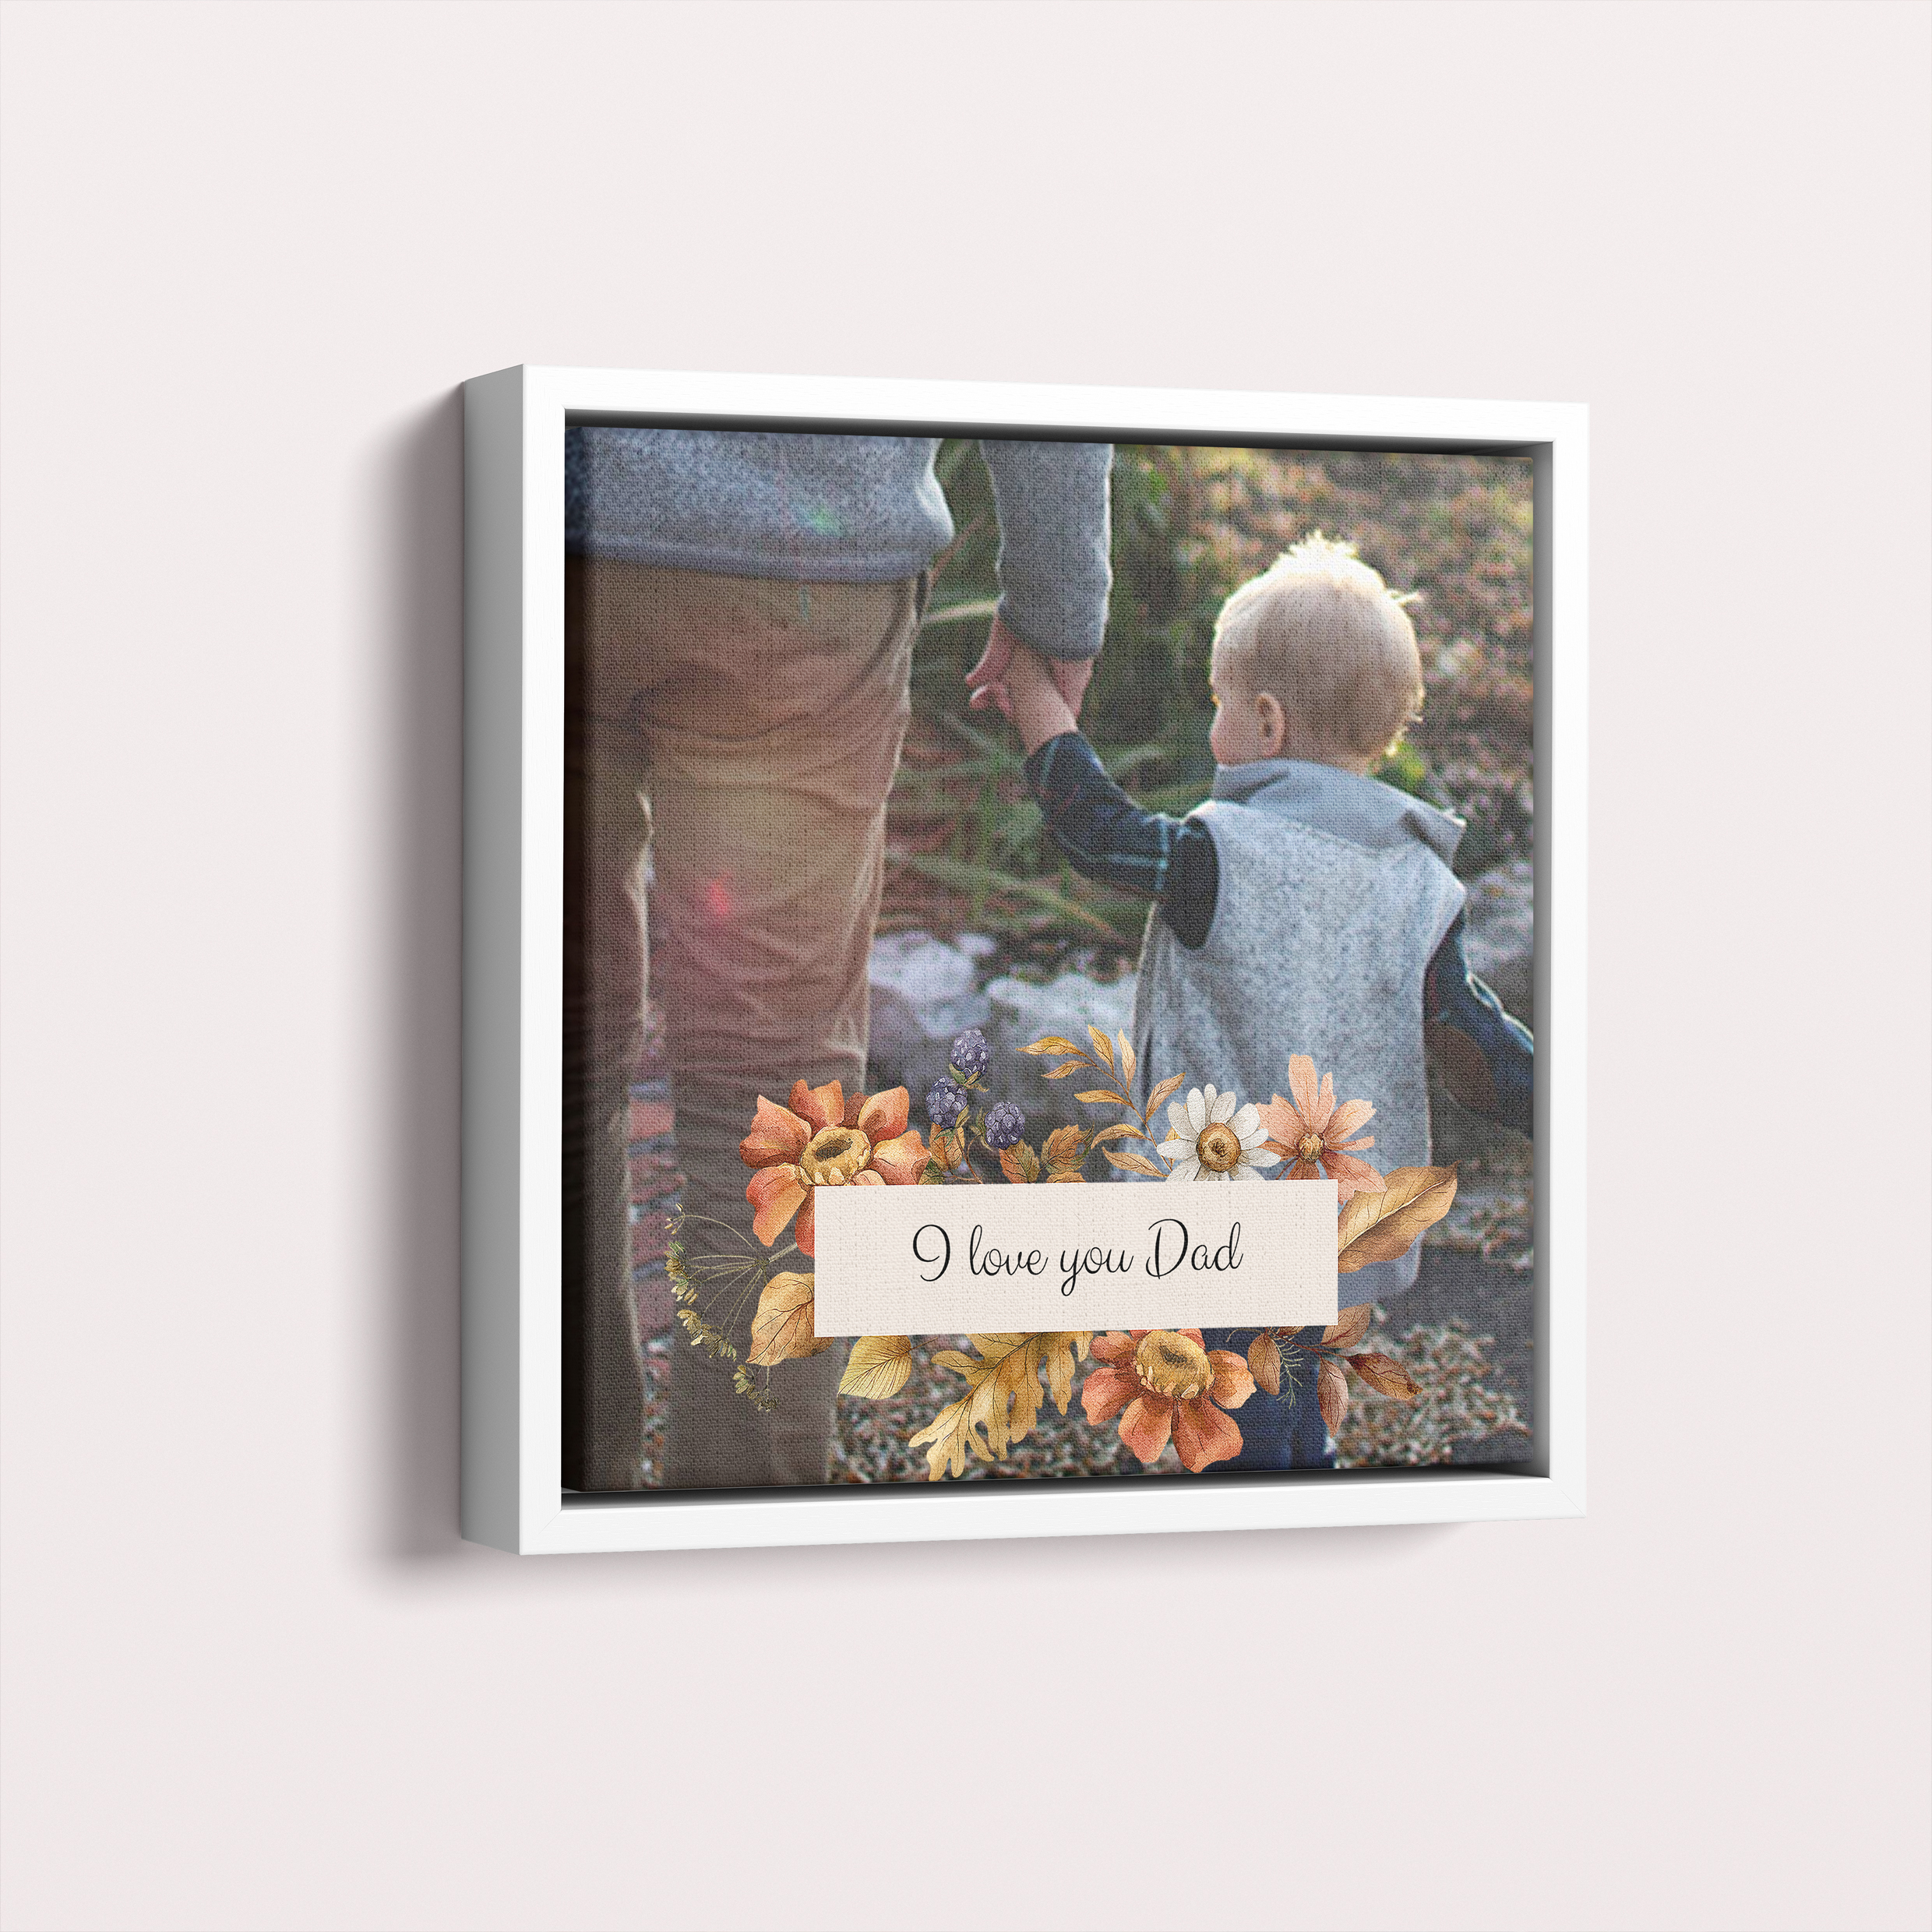 Dad's Frame Framed Photo Canvas - Capture a Special Bond with One Cherished Photo